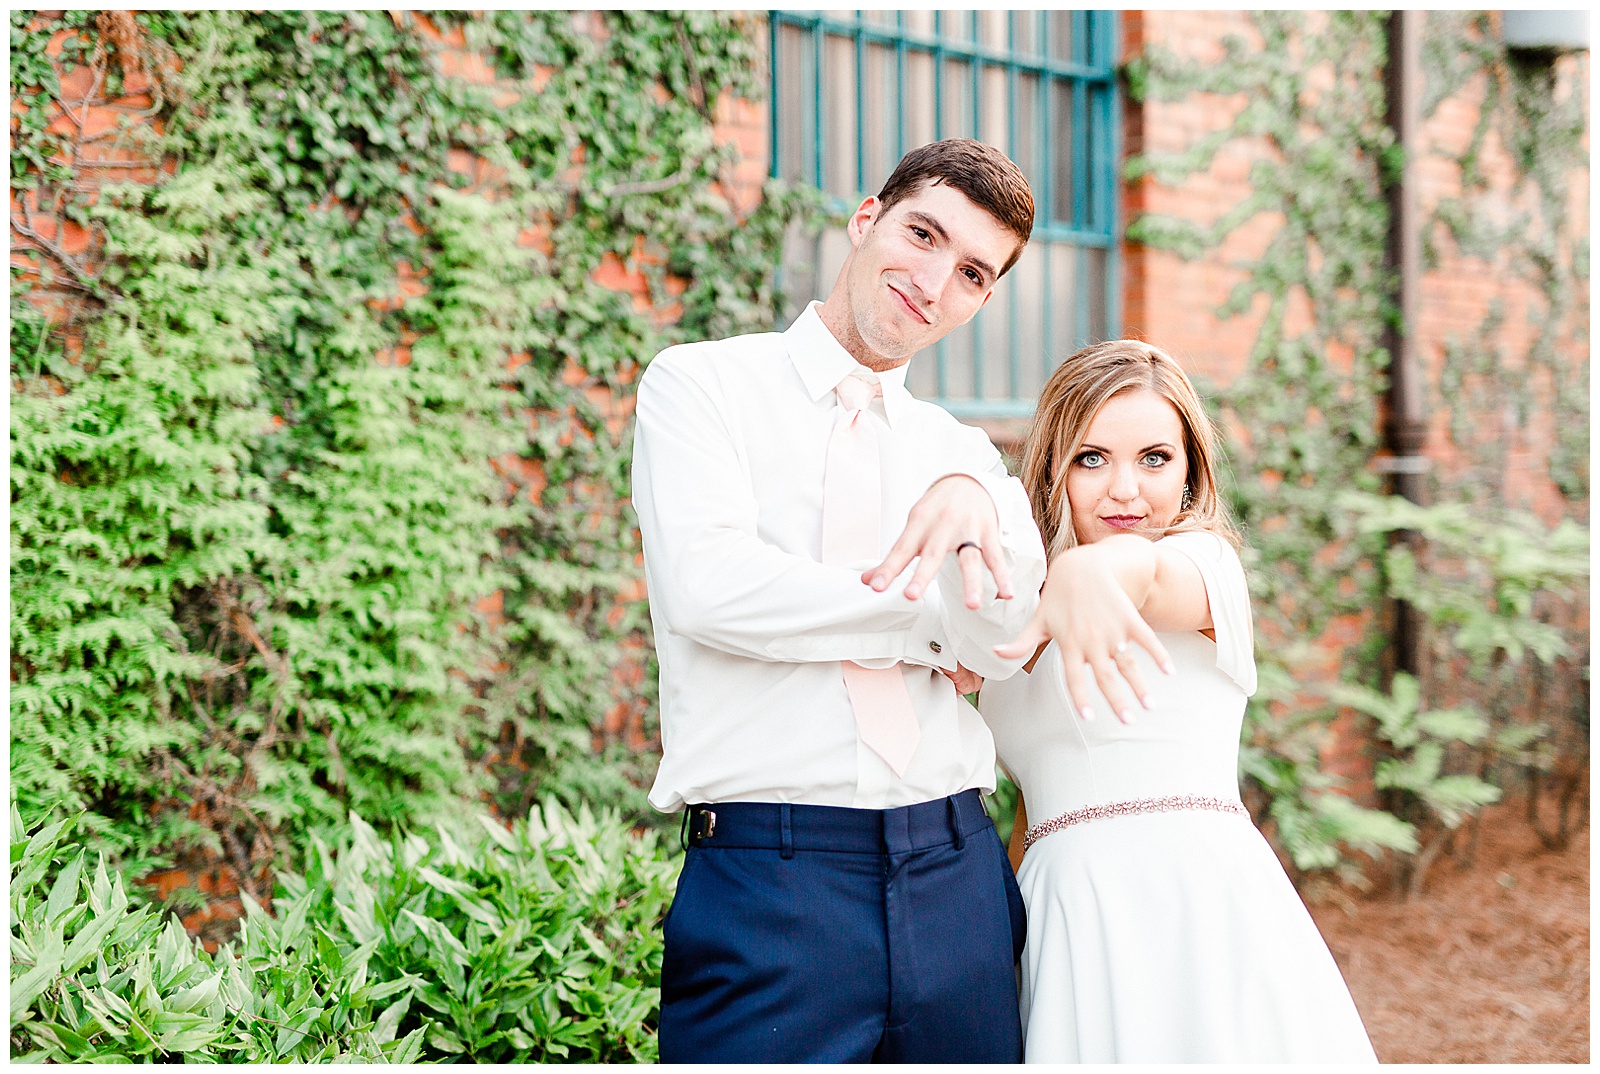 Funny Bride and Groom Photo of Rings outdoor portraits in front of vine-covered brick building from Summer Wedding in Charlotte, NC | Check out the full wedding at KevynDixonPhoto.com